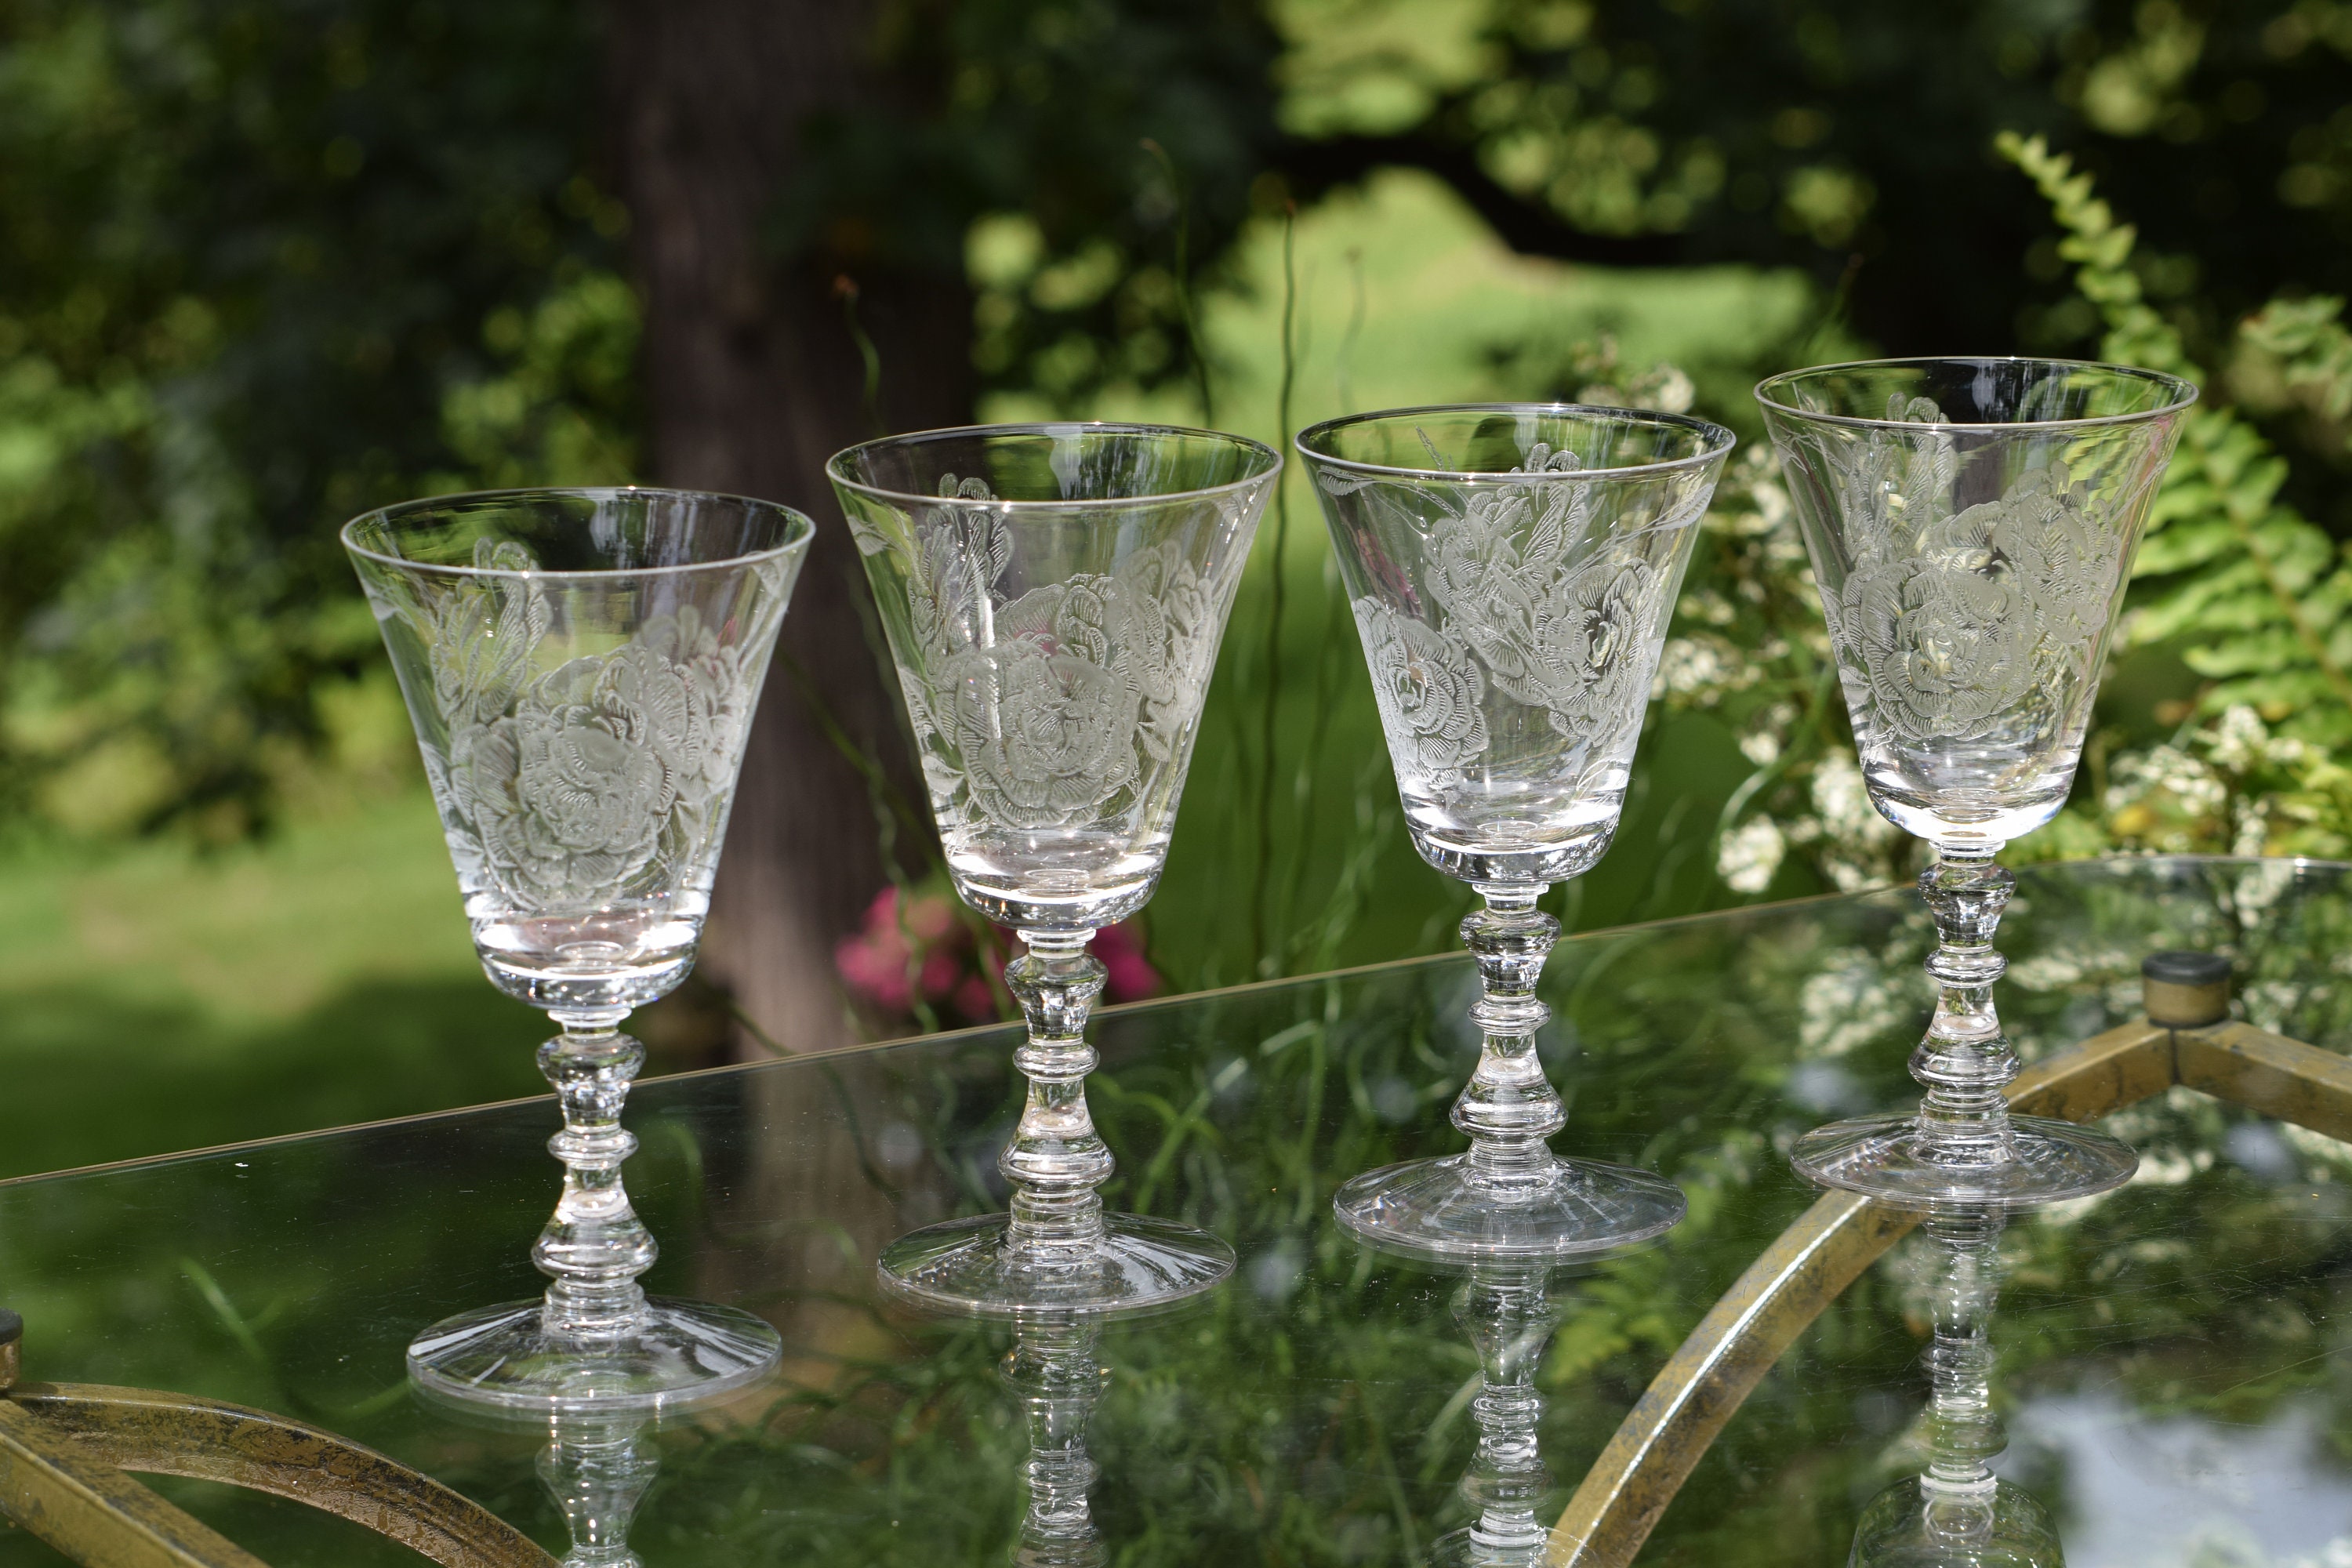 4 Vintage Etched Crystal Wine Glasses, Set of 4, Fostoria Lido, circa 1937,  Tall Etched Crystal Water Glasses, Wedding Toasting Glasses